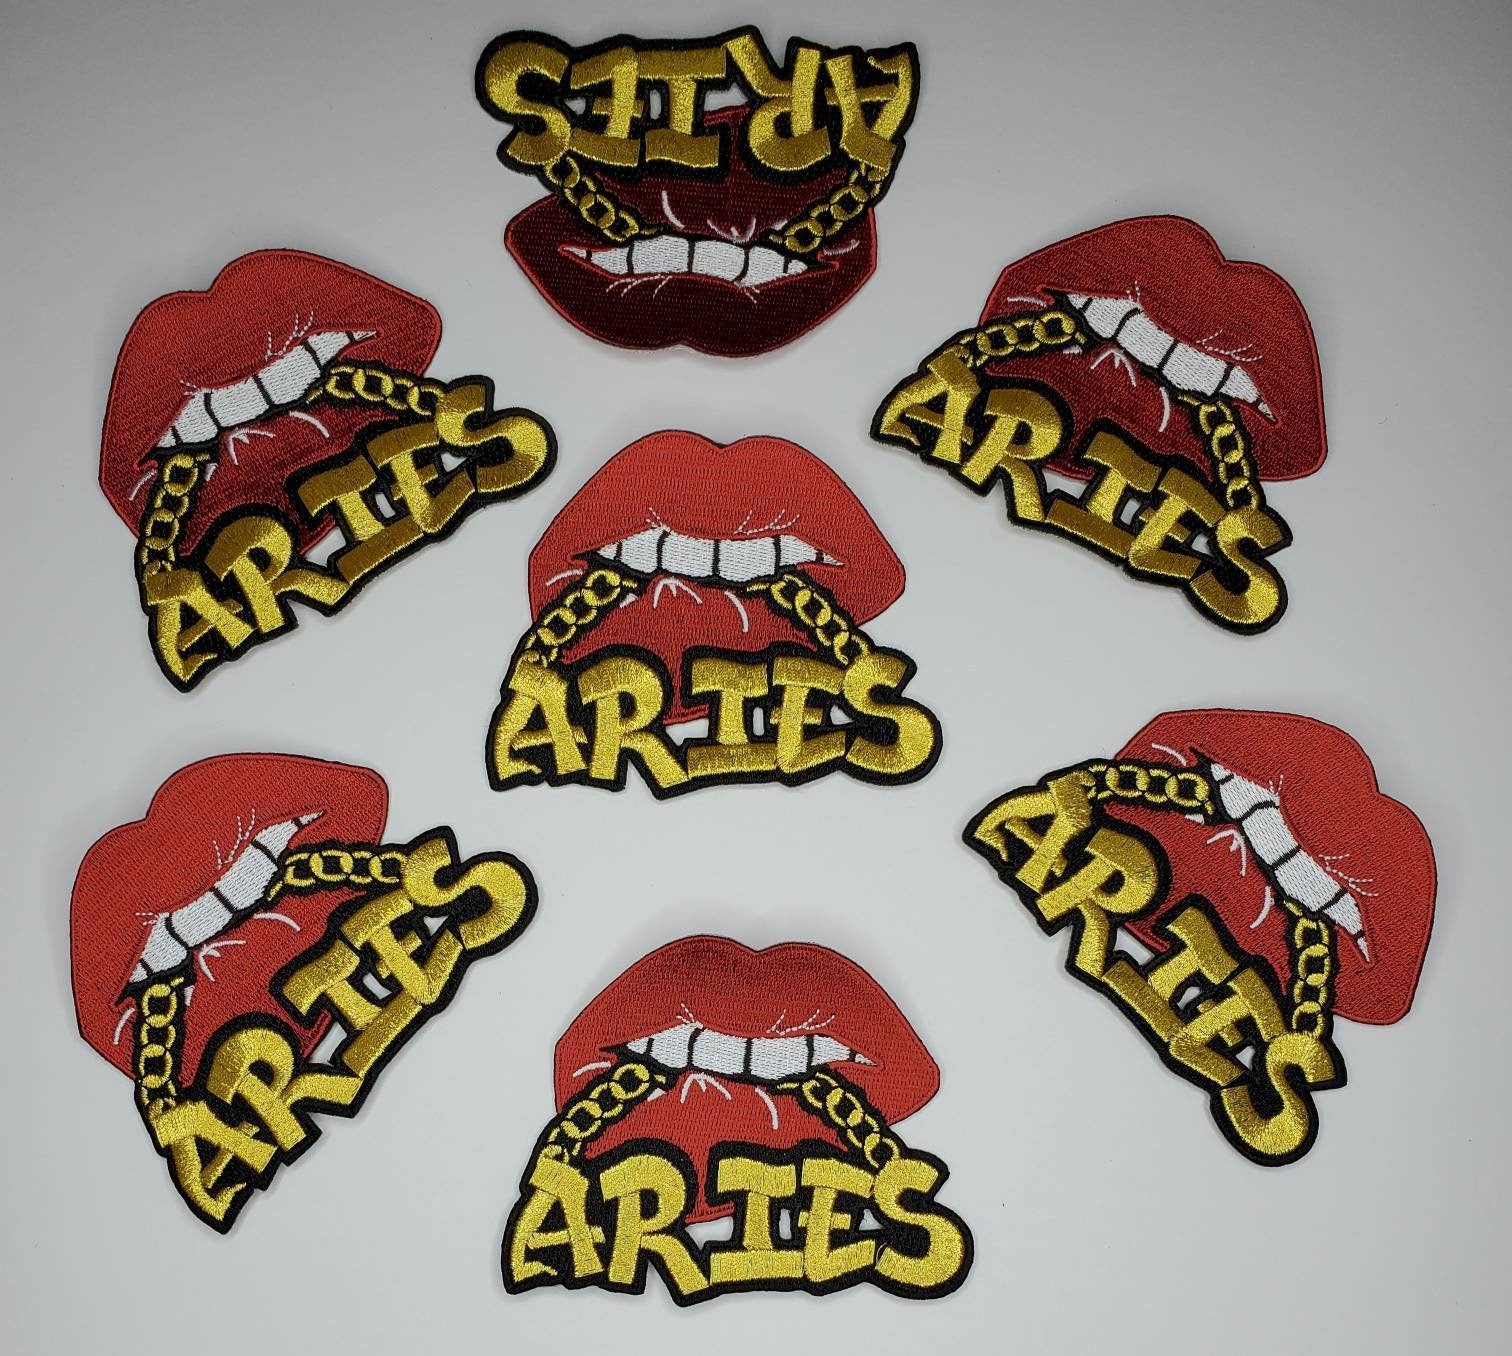 Poppin' Red Lip "Aries" w/Gold Metallic Chain|Iron-On Patch|Astrology Applique|Cool Embroidered Patch|DIY Patch for Denim & Accessories